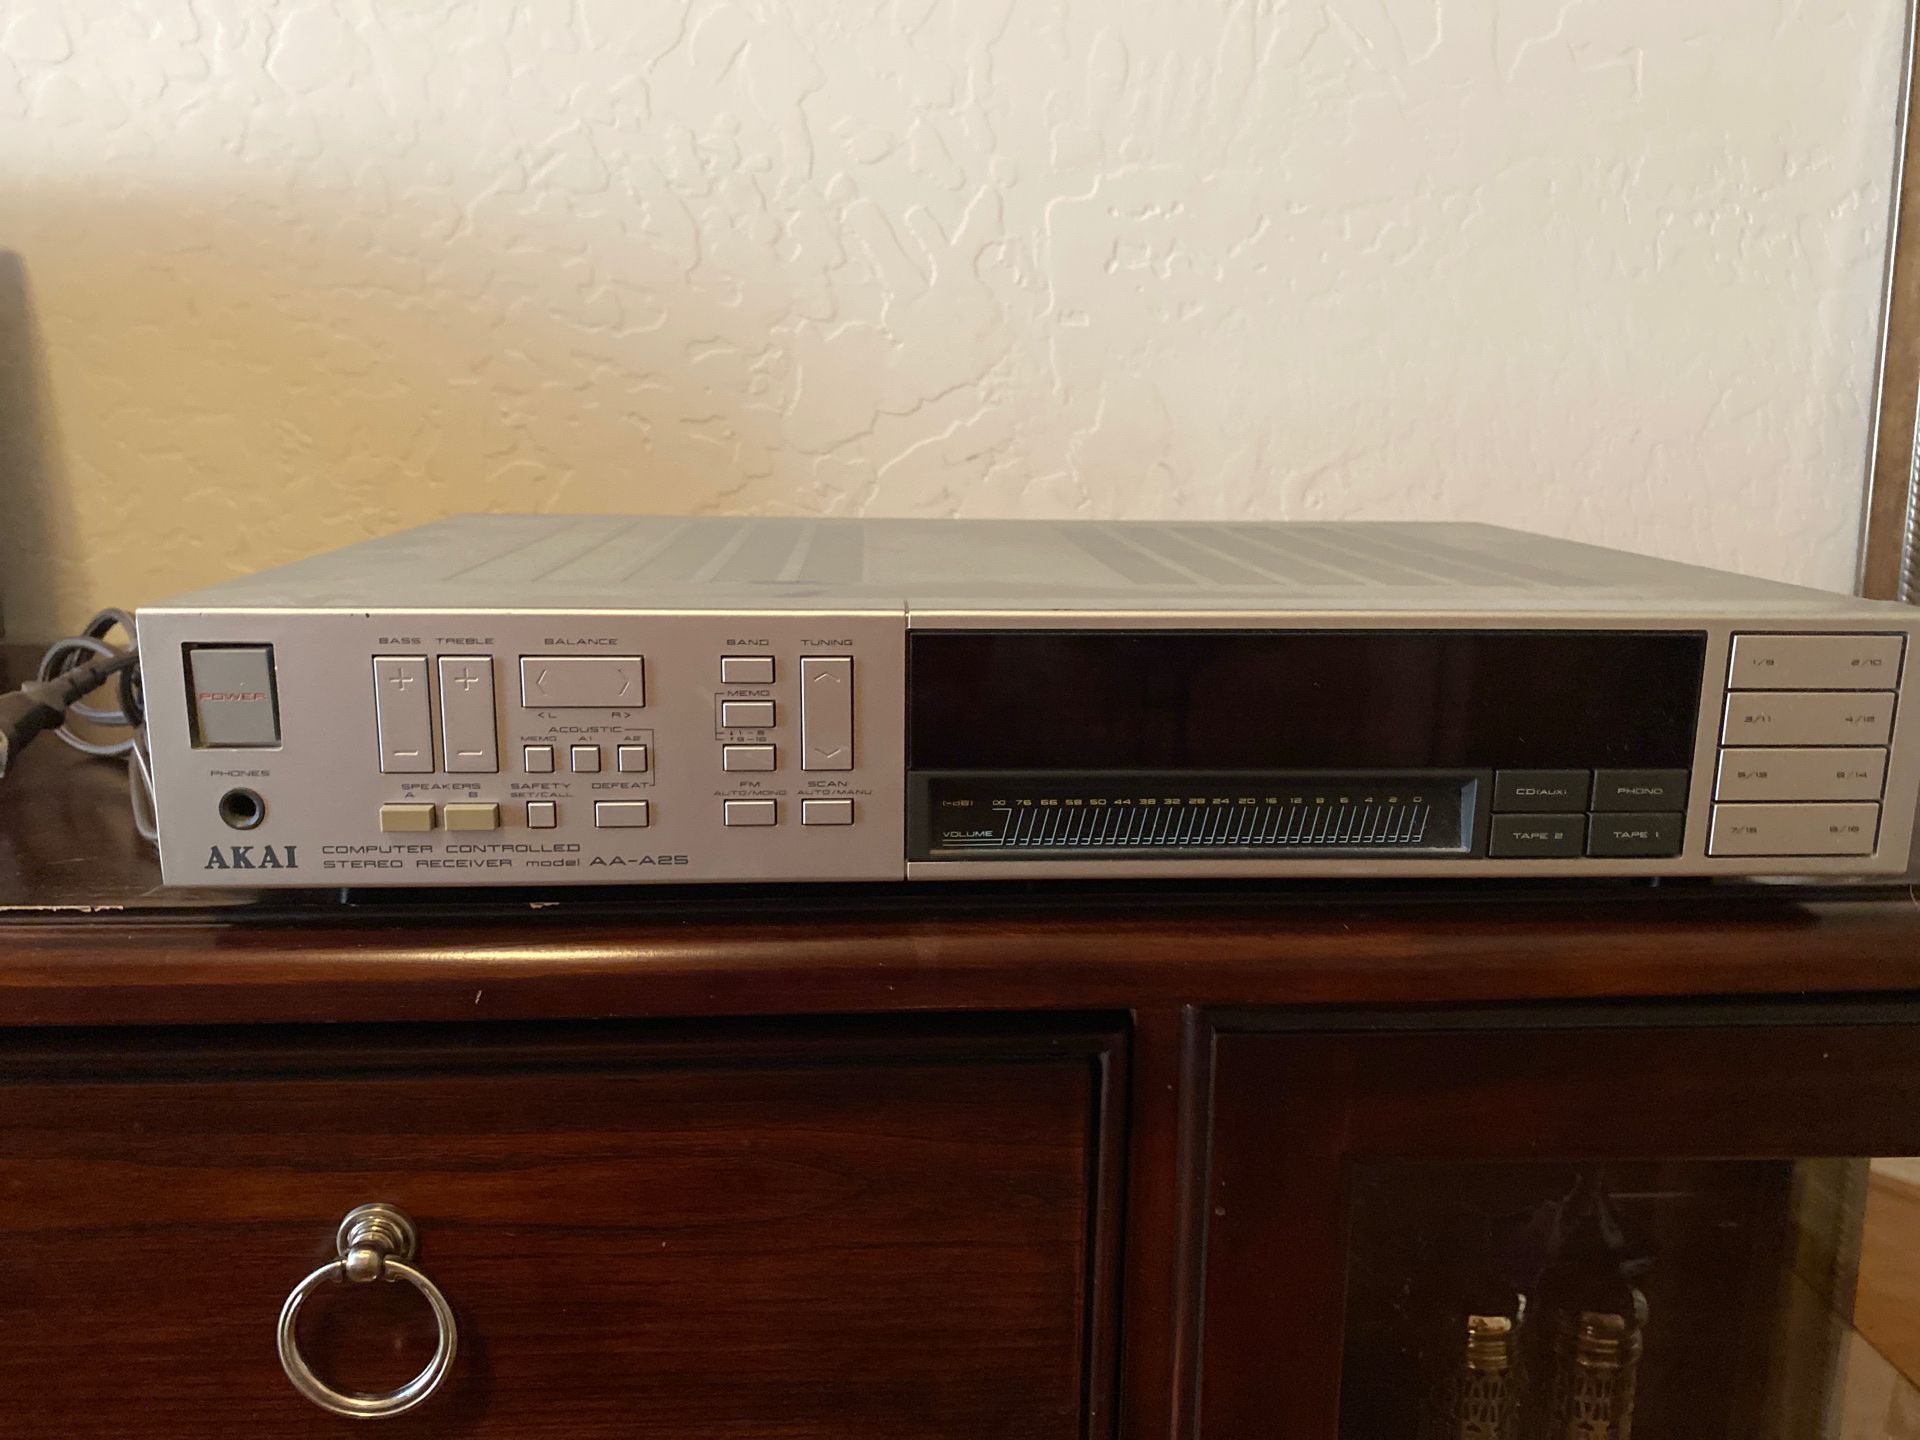 AKAI old school computer controlled stereo receiver